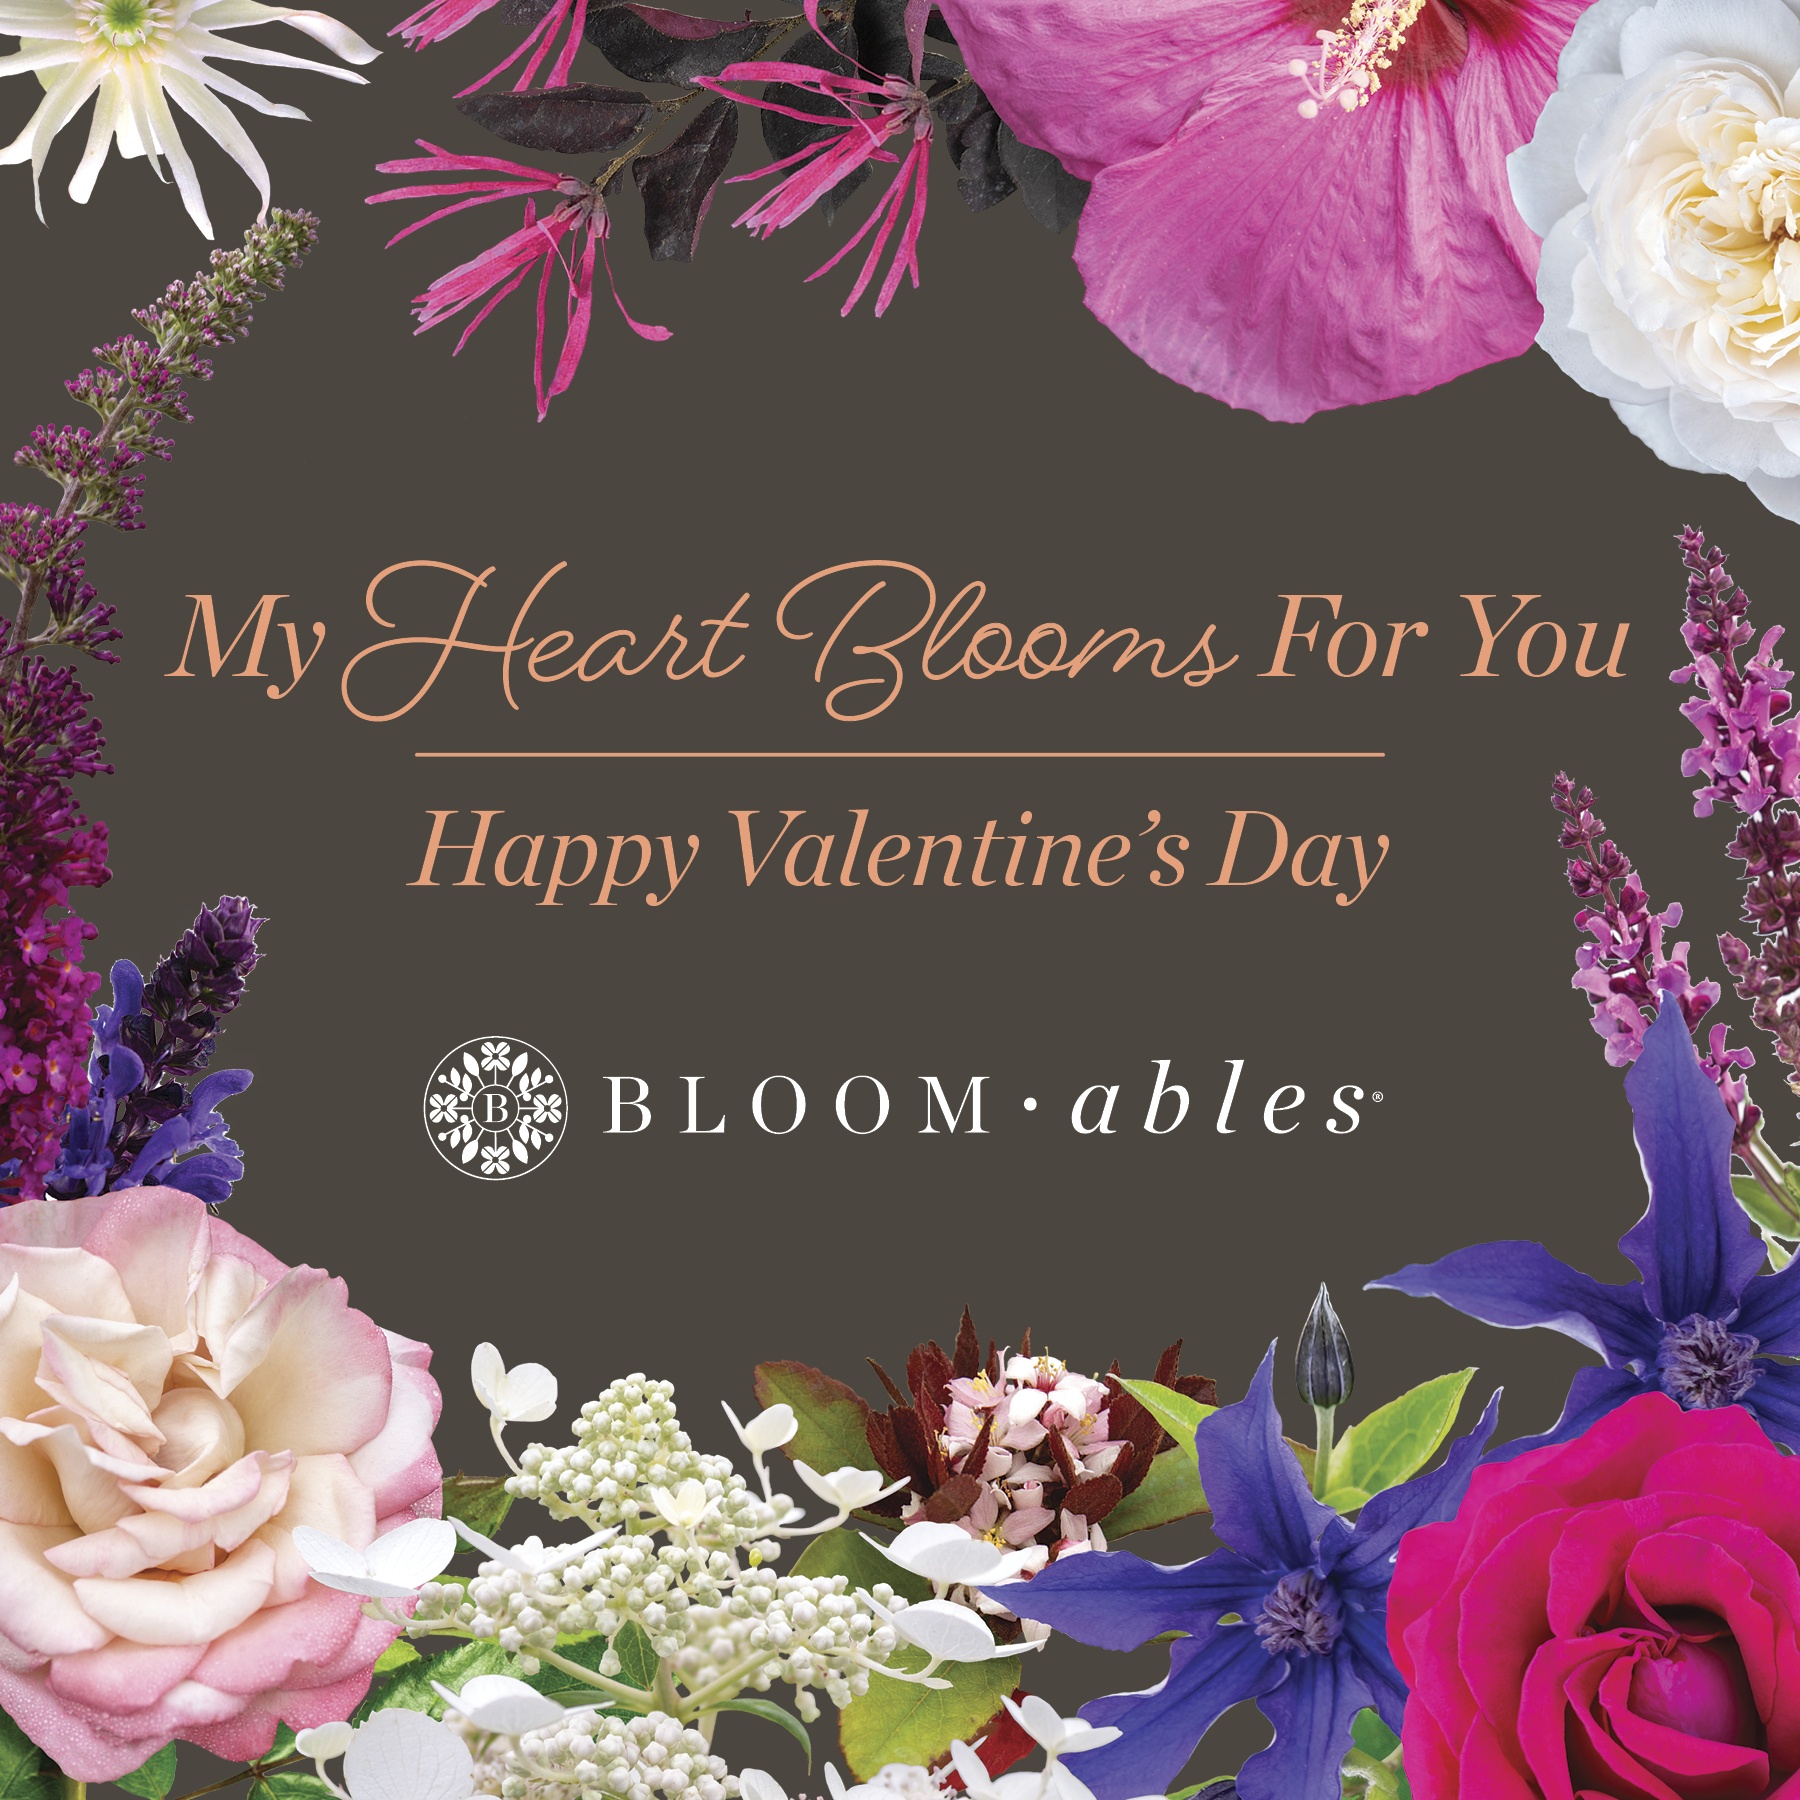 Open My Heart Blooms For You Valentine's Post for Instagram